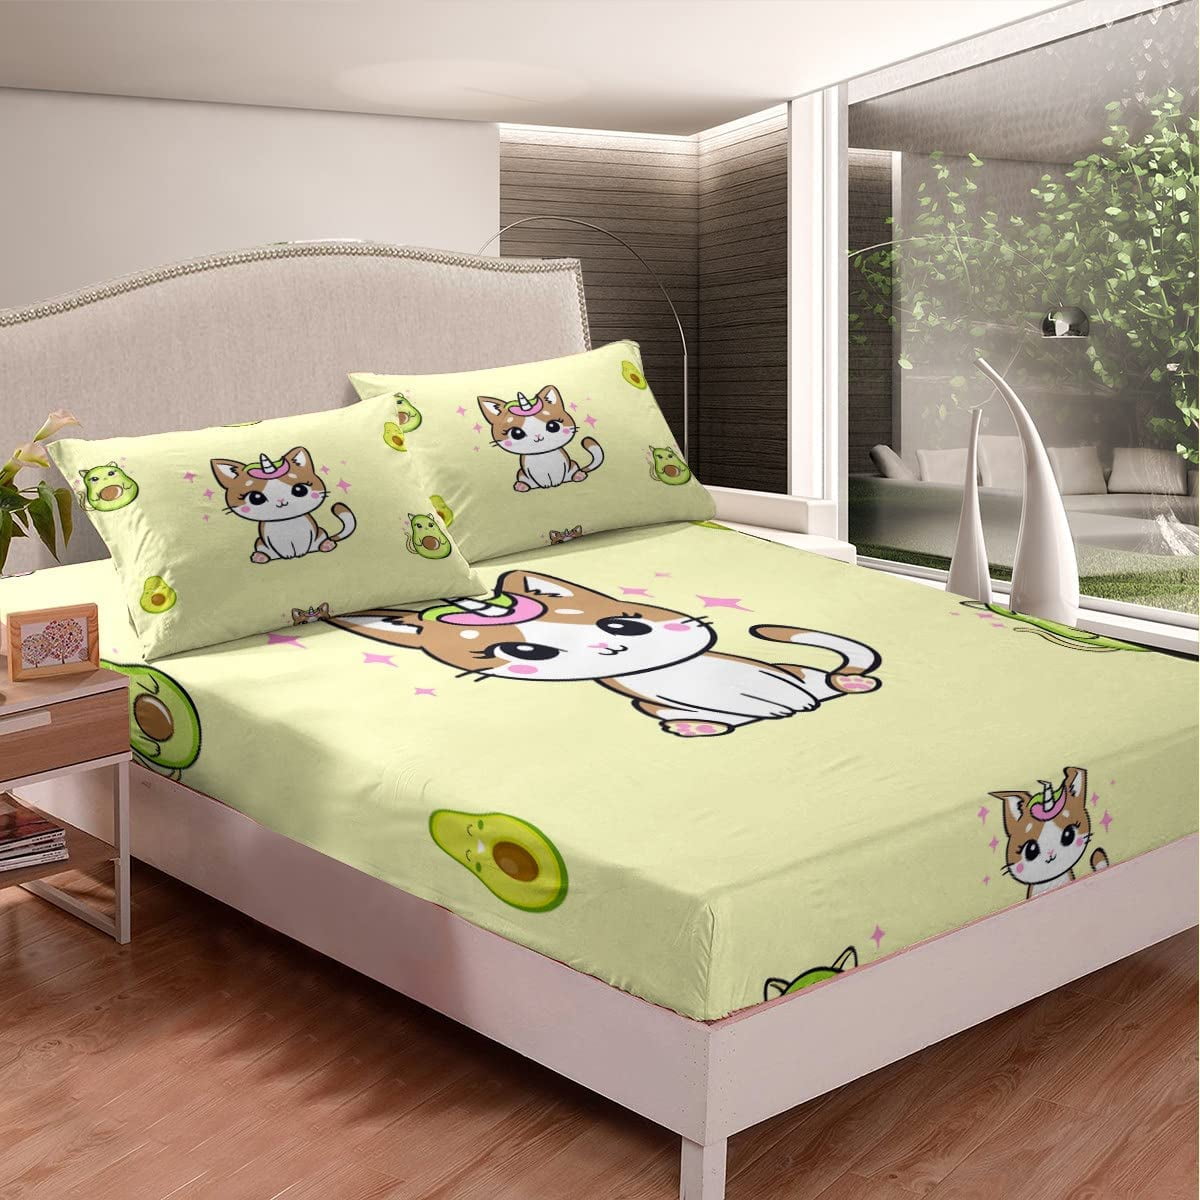 Cartoon Cat Bed Sheet Set Cute Unicorn CatBedding Sheets for Kids Boys  Girls Animal Theme Bedding Fitted Sheet Kawaii Avocado Bed Cover 1 Bed Sheet  Set with 2 Pillowcases Full Size 